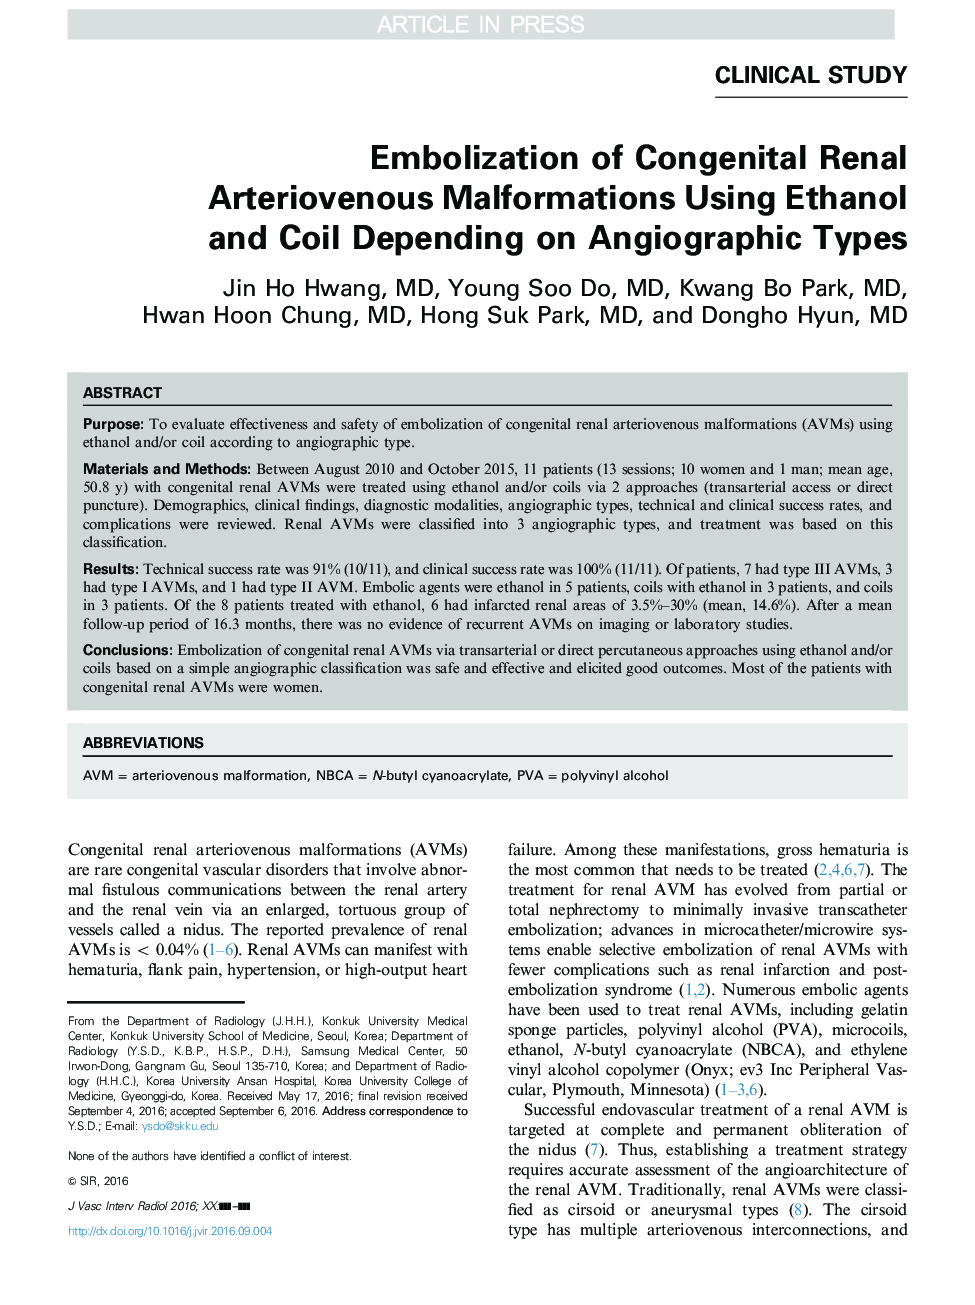 Embolization of Congenital Renal Arteriovenous Malformations Using Ethanol and Coil Depending on Angiographic Types